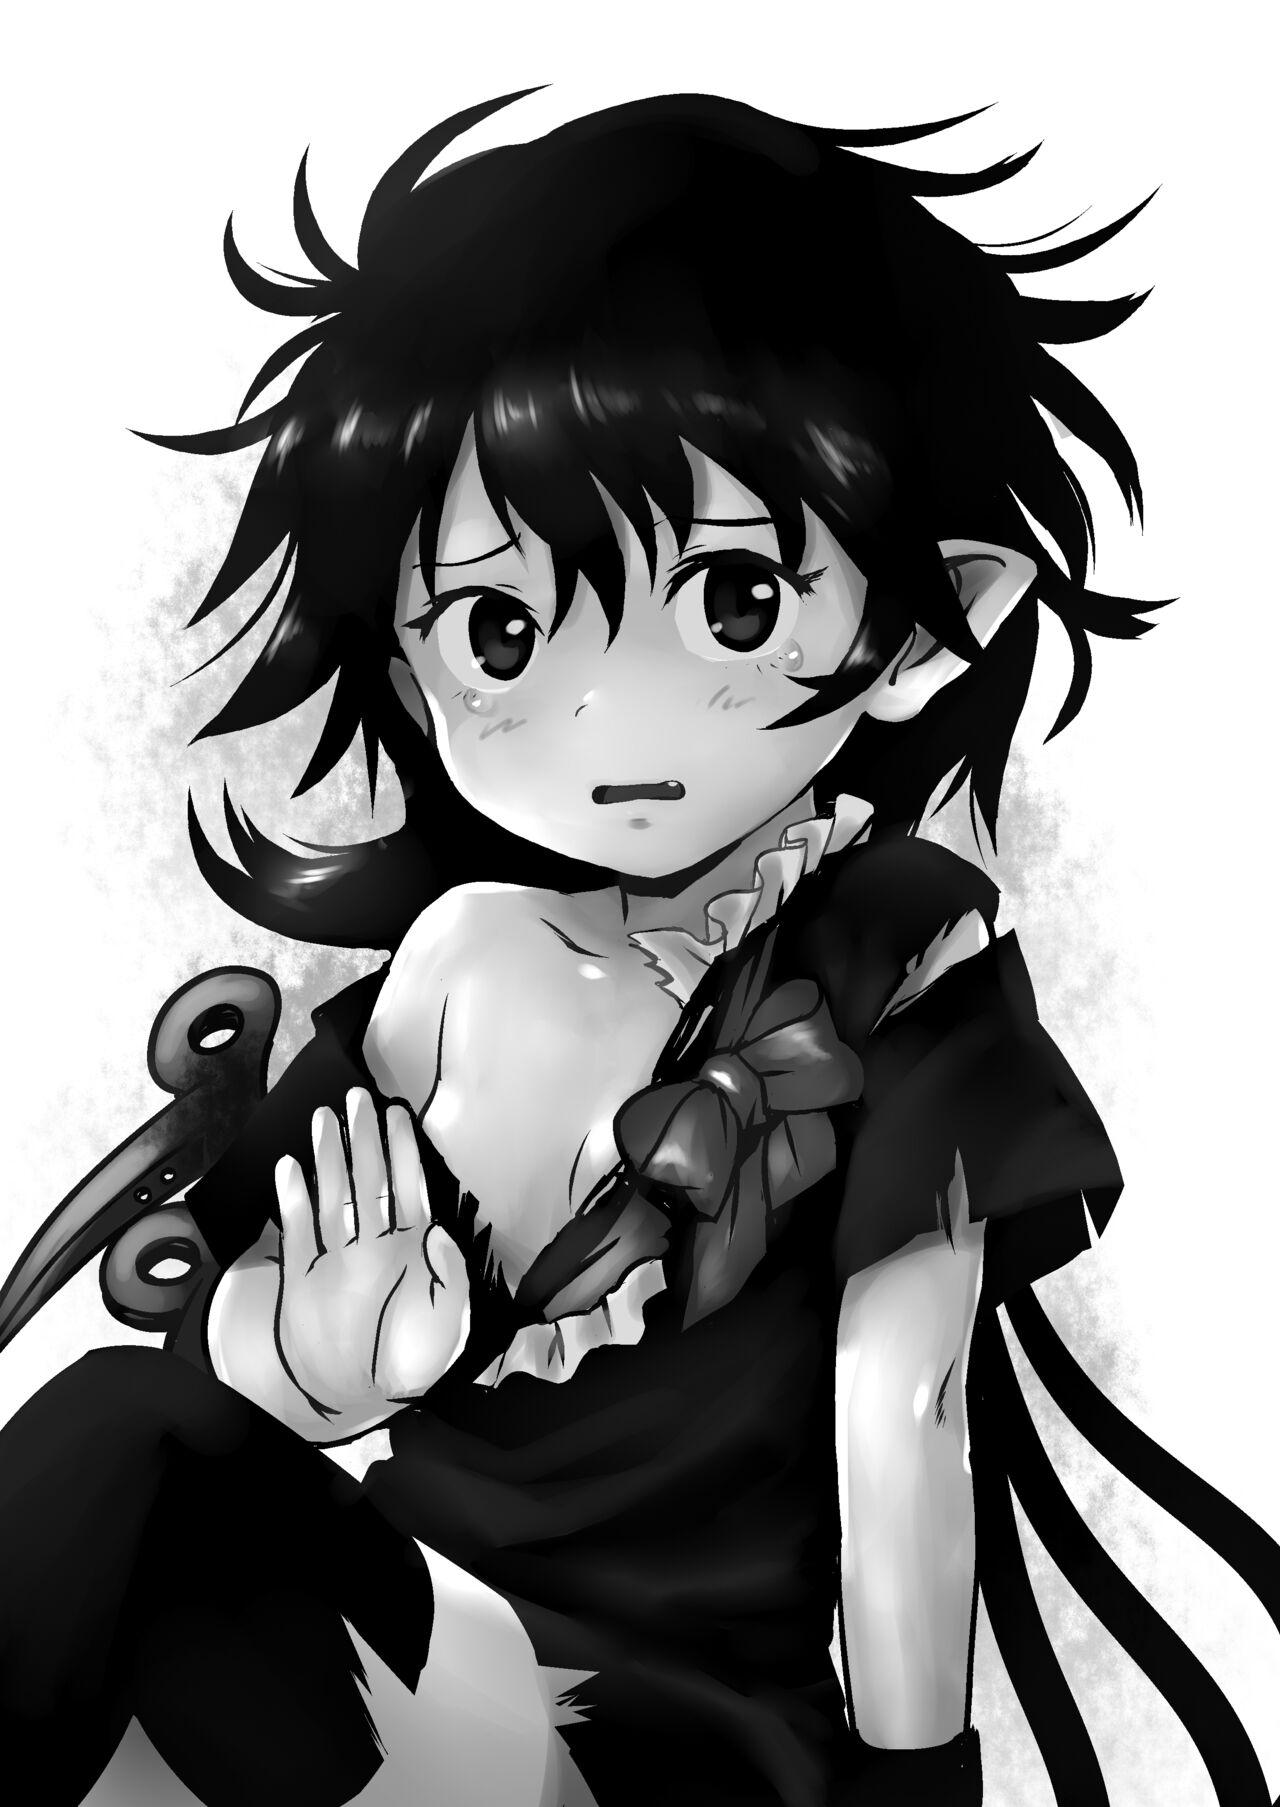 Passivo Trauma! Nue-chan! - Touhou project Show - Picture 2